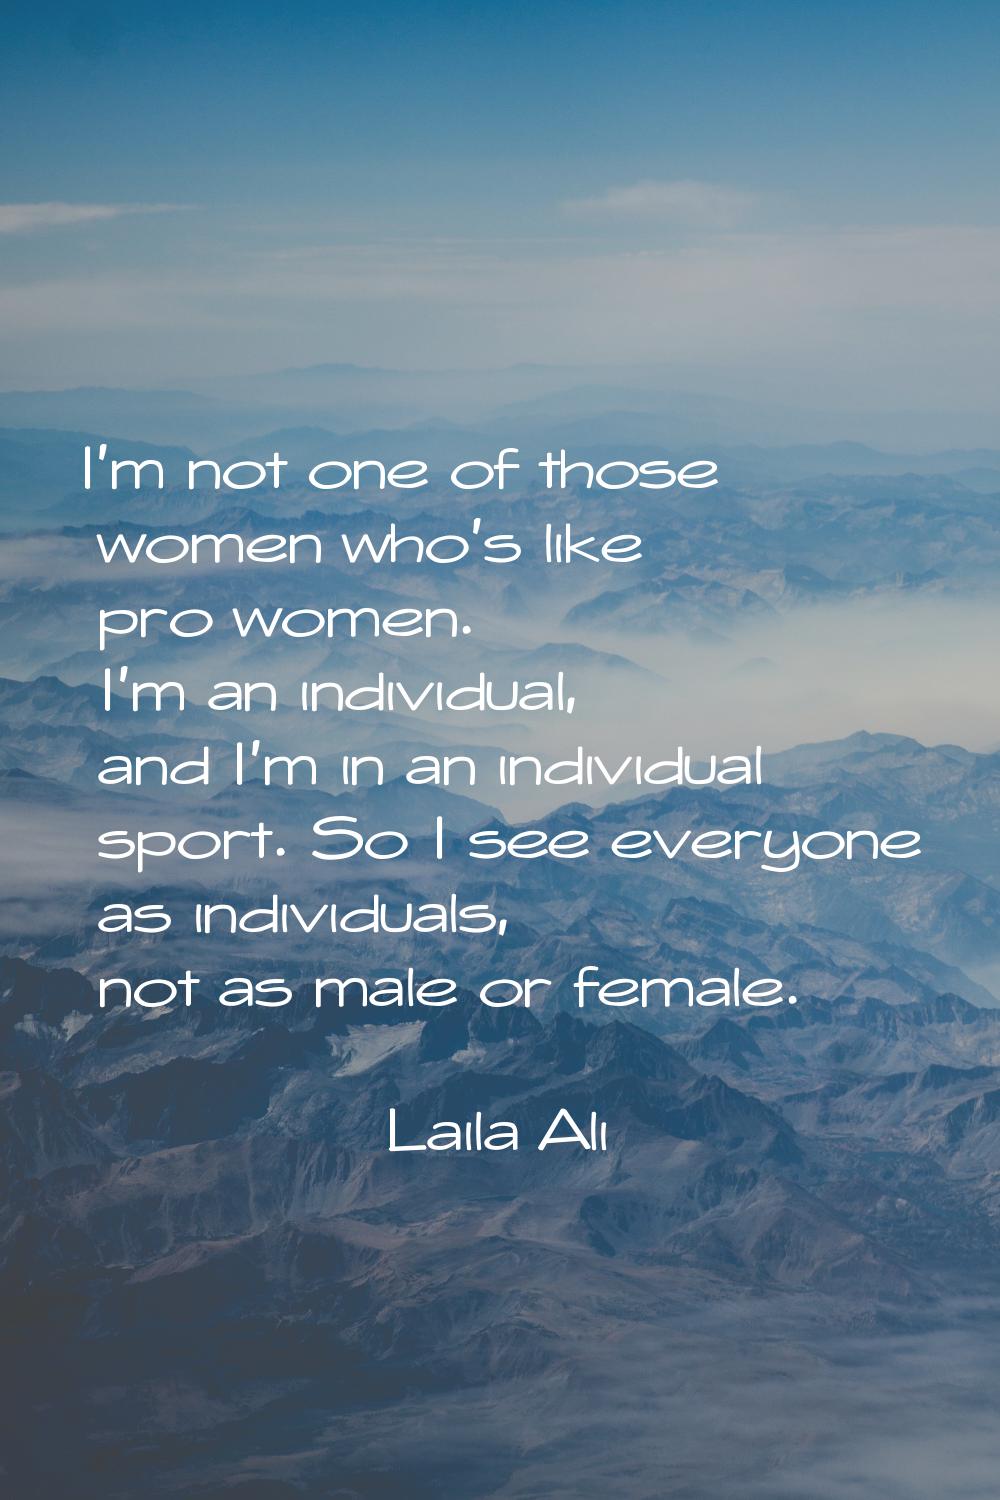 I'm not one of those women who's like pro women. I'm an individual, and I'm in an individual sport.